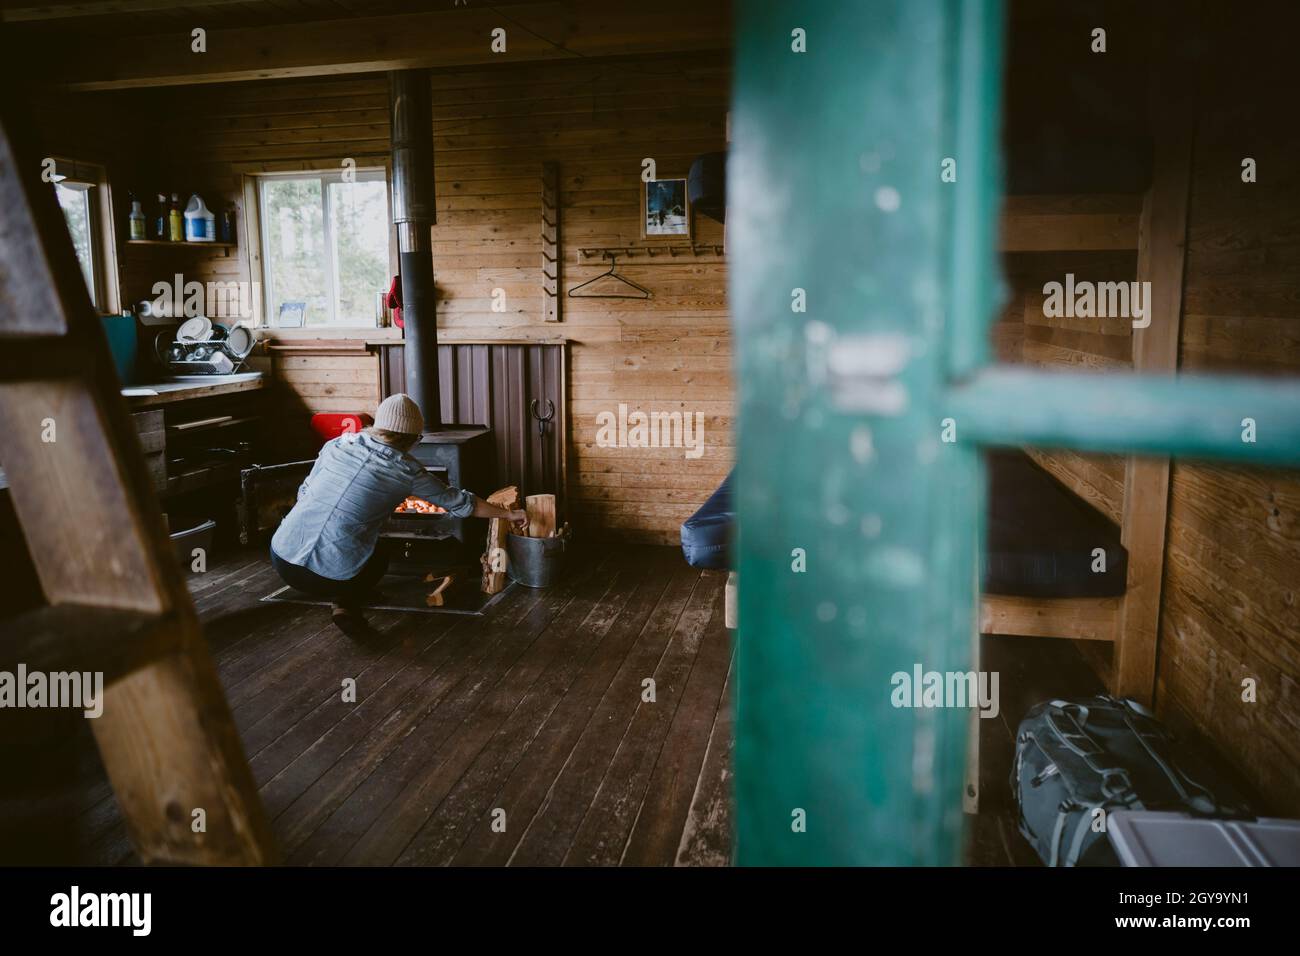 View through doorway of a woman stoking fire inside rustic cabin Stock Photo